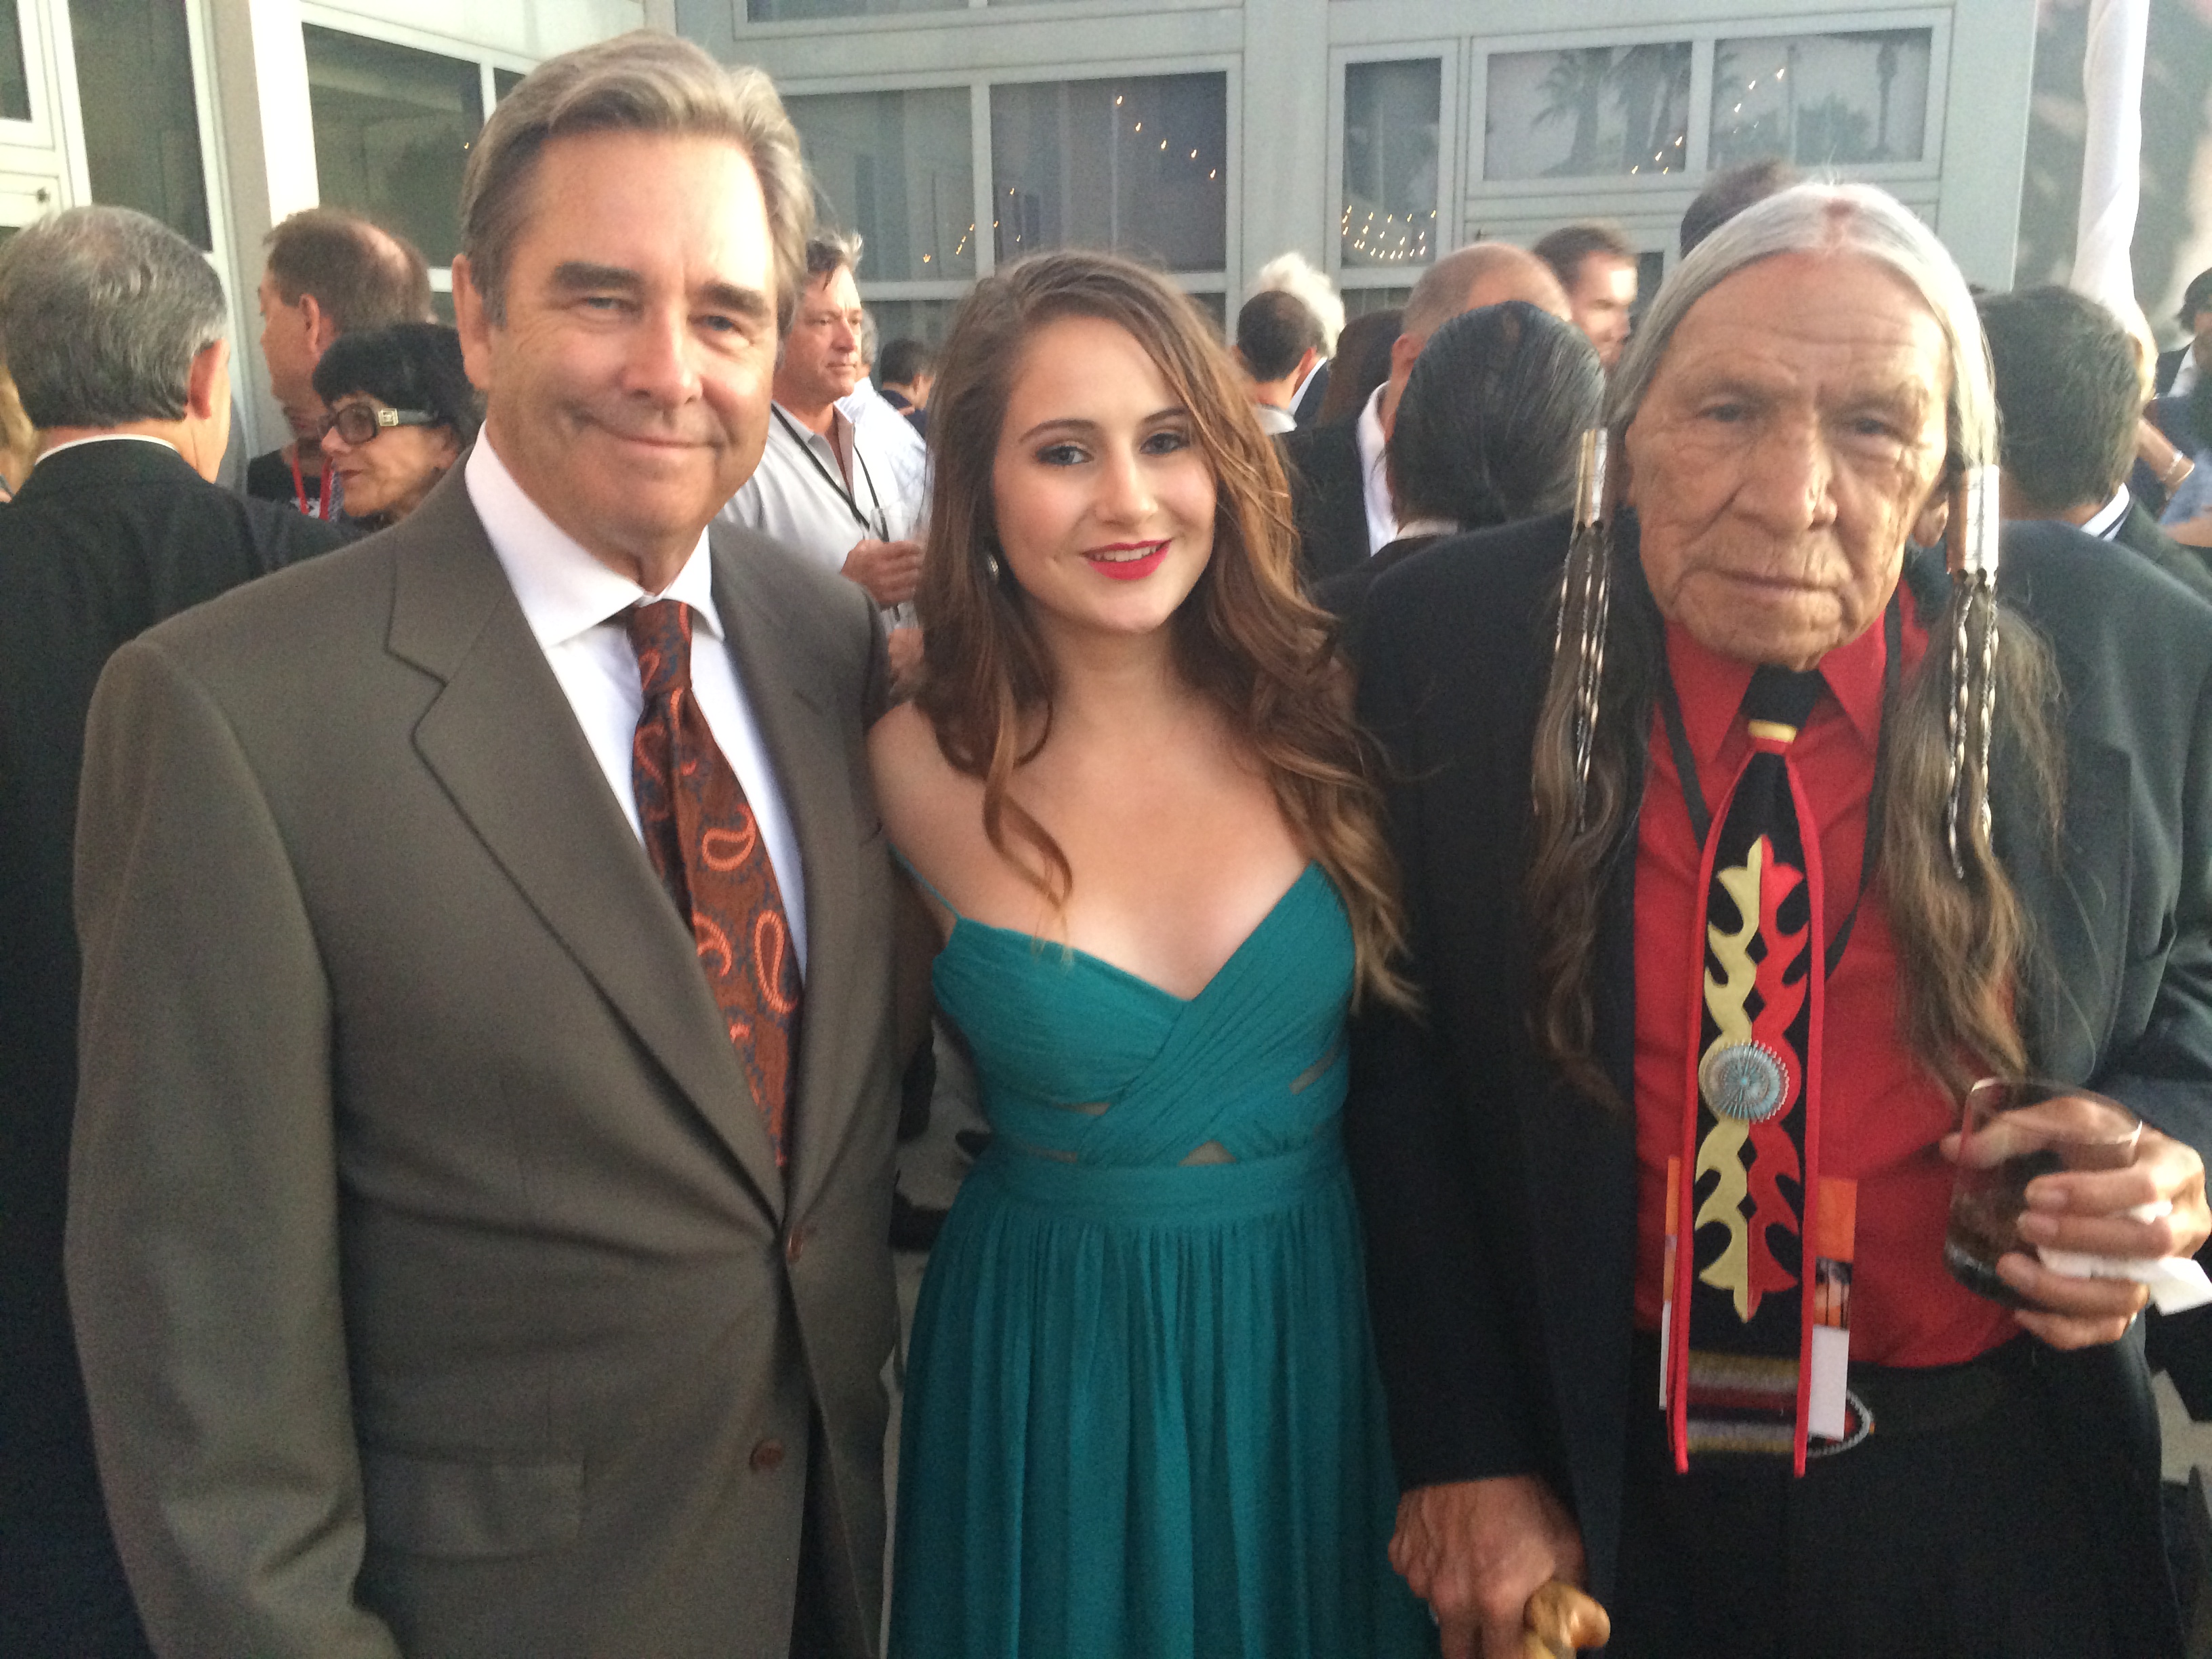 Night of the Stars Tribute Event, with Honorees. (l-r; Beau Bridges, Bella King, Saginaw Grant)